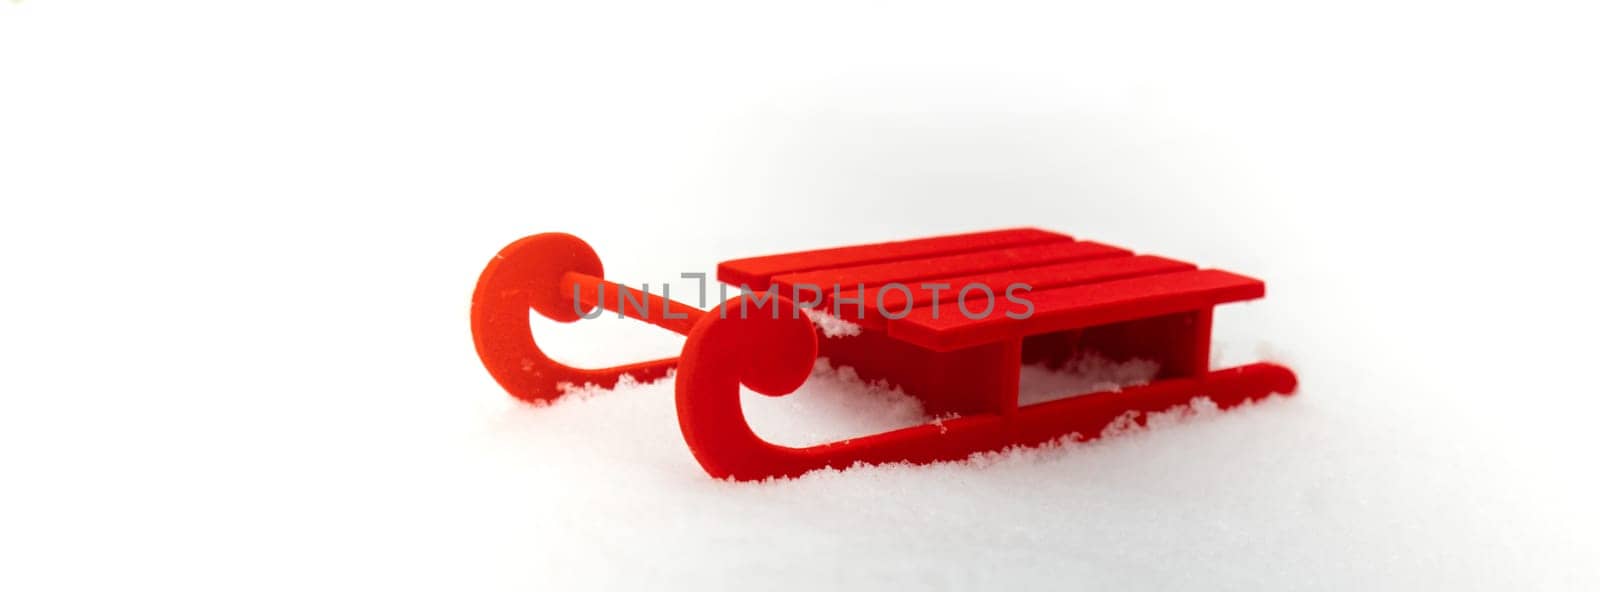 Small Red sled on snow background in beautiful winter day. Copy space for text. Mock up for product greeting card or wallpaper. Christmas holiday concept.